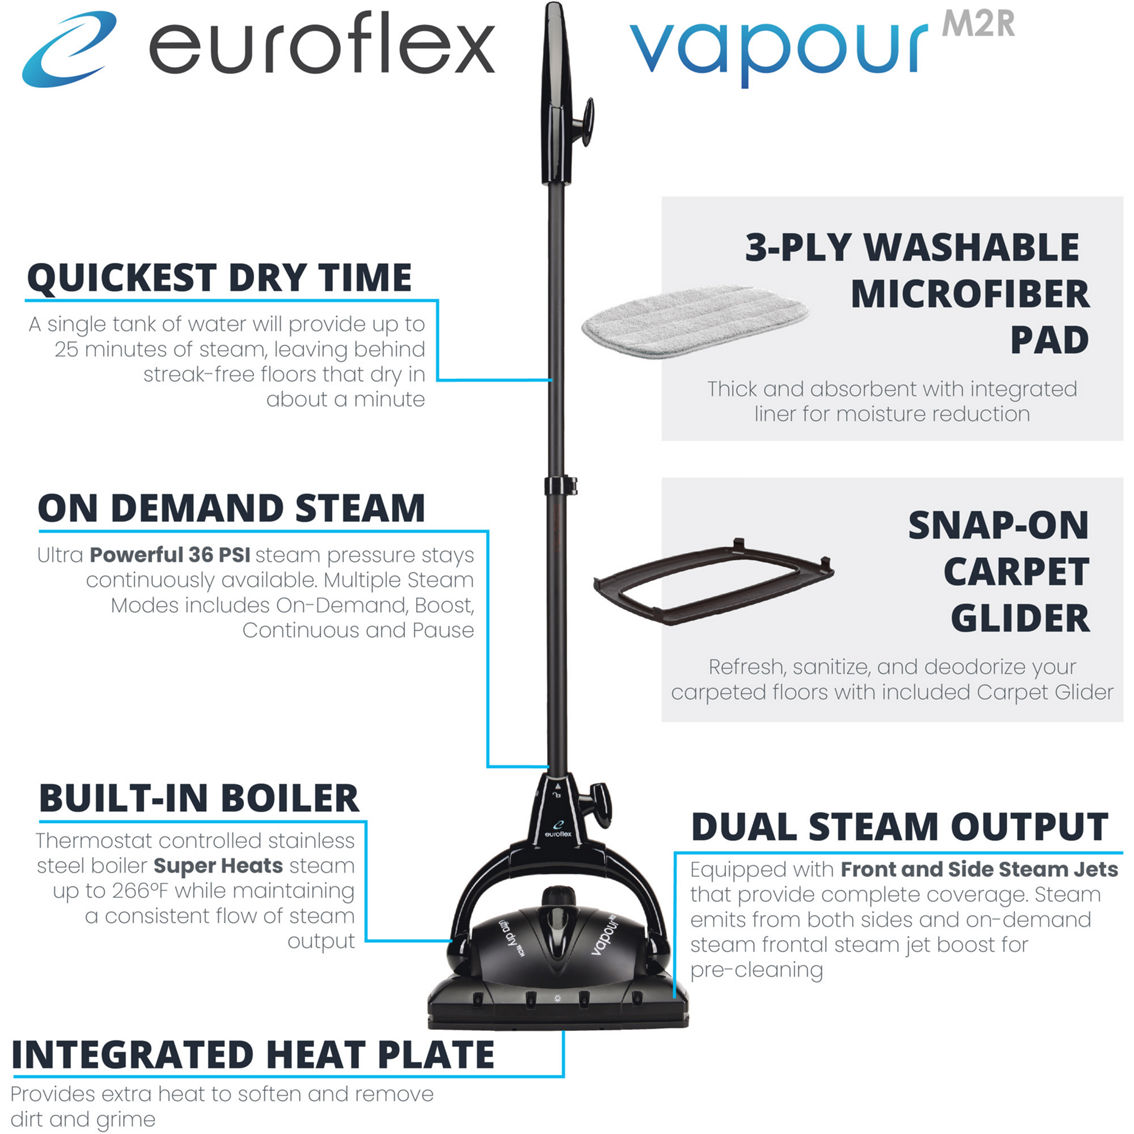 Euroflex Ultra Dry Steam M2R Upright Floor Cleaner - Image 4 of 5